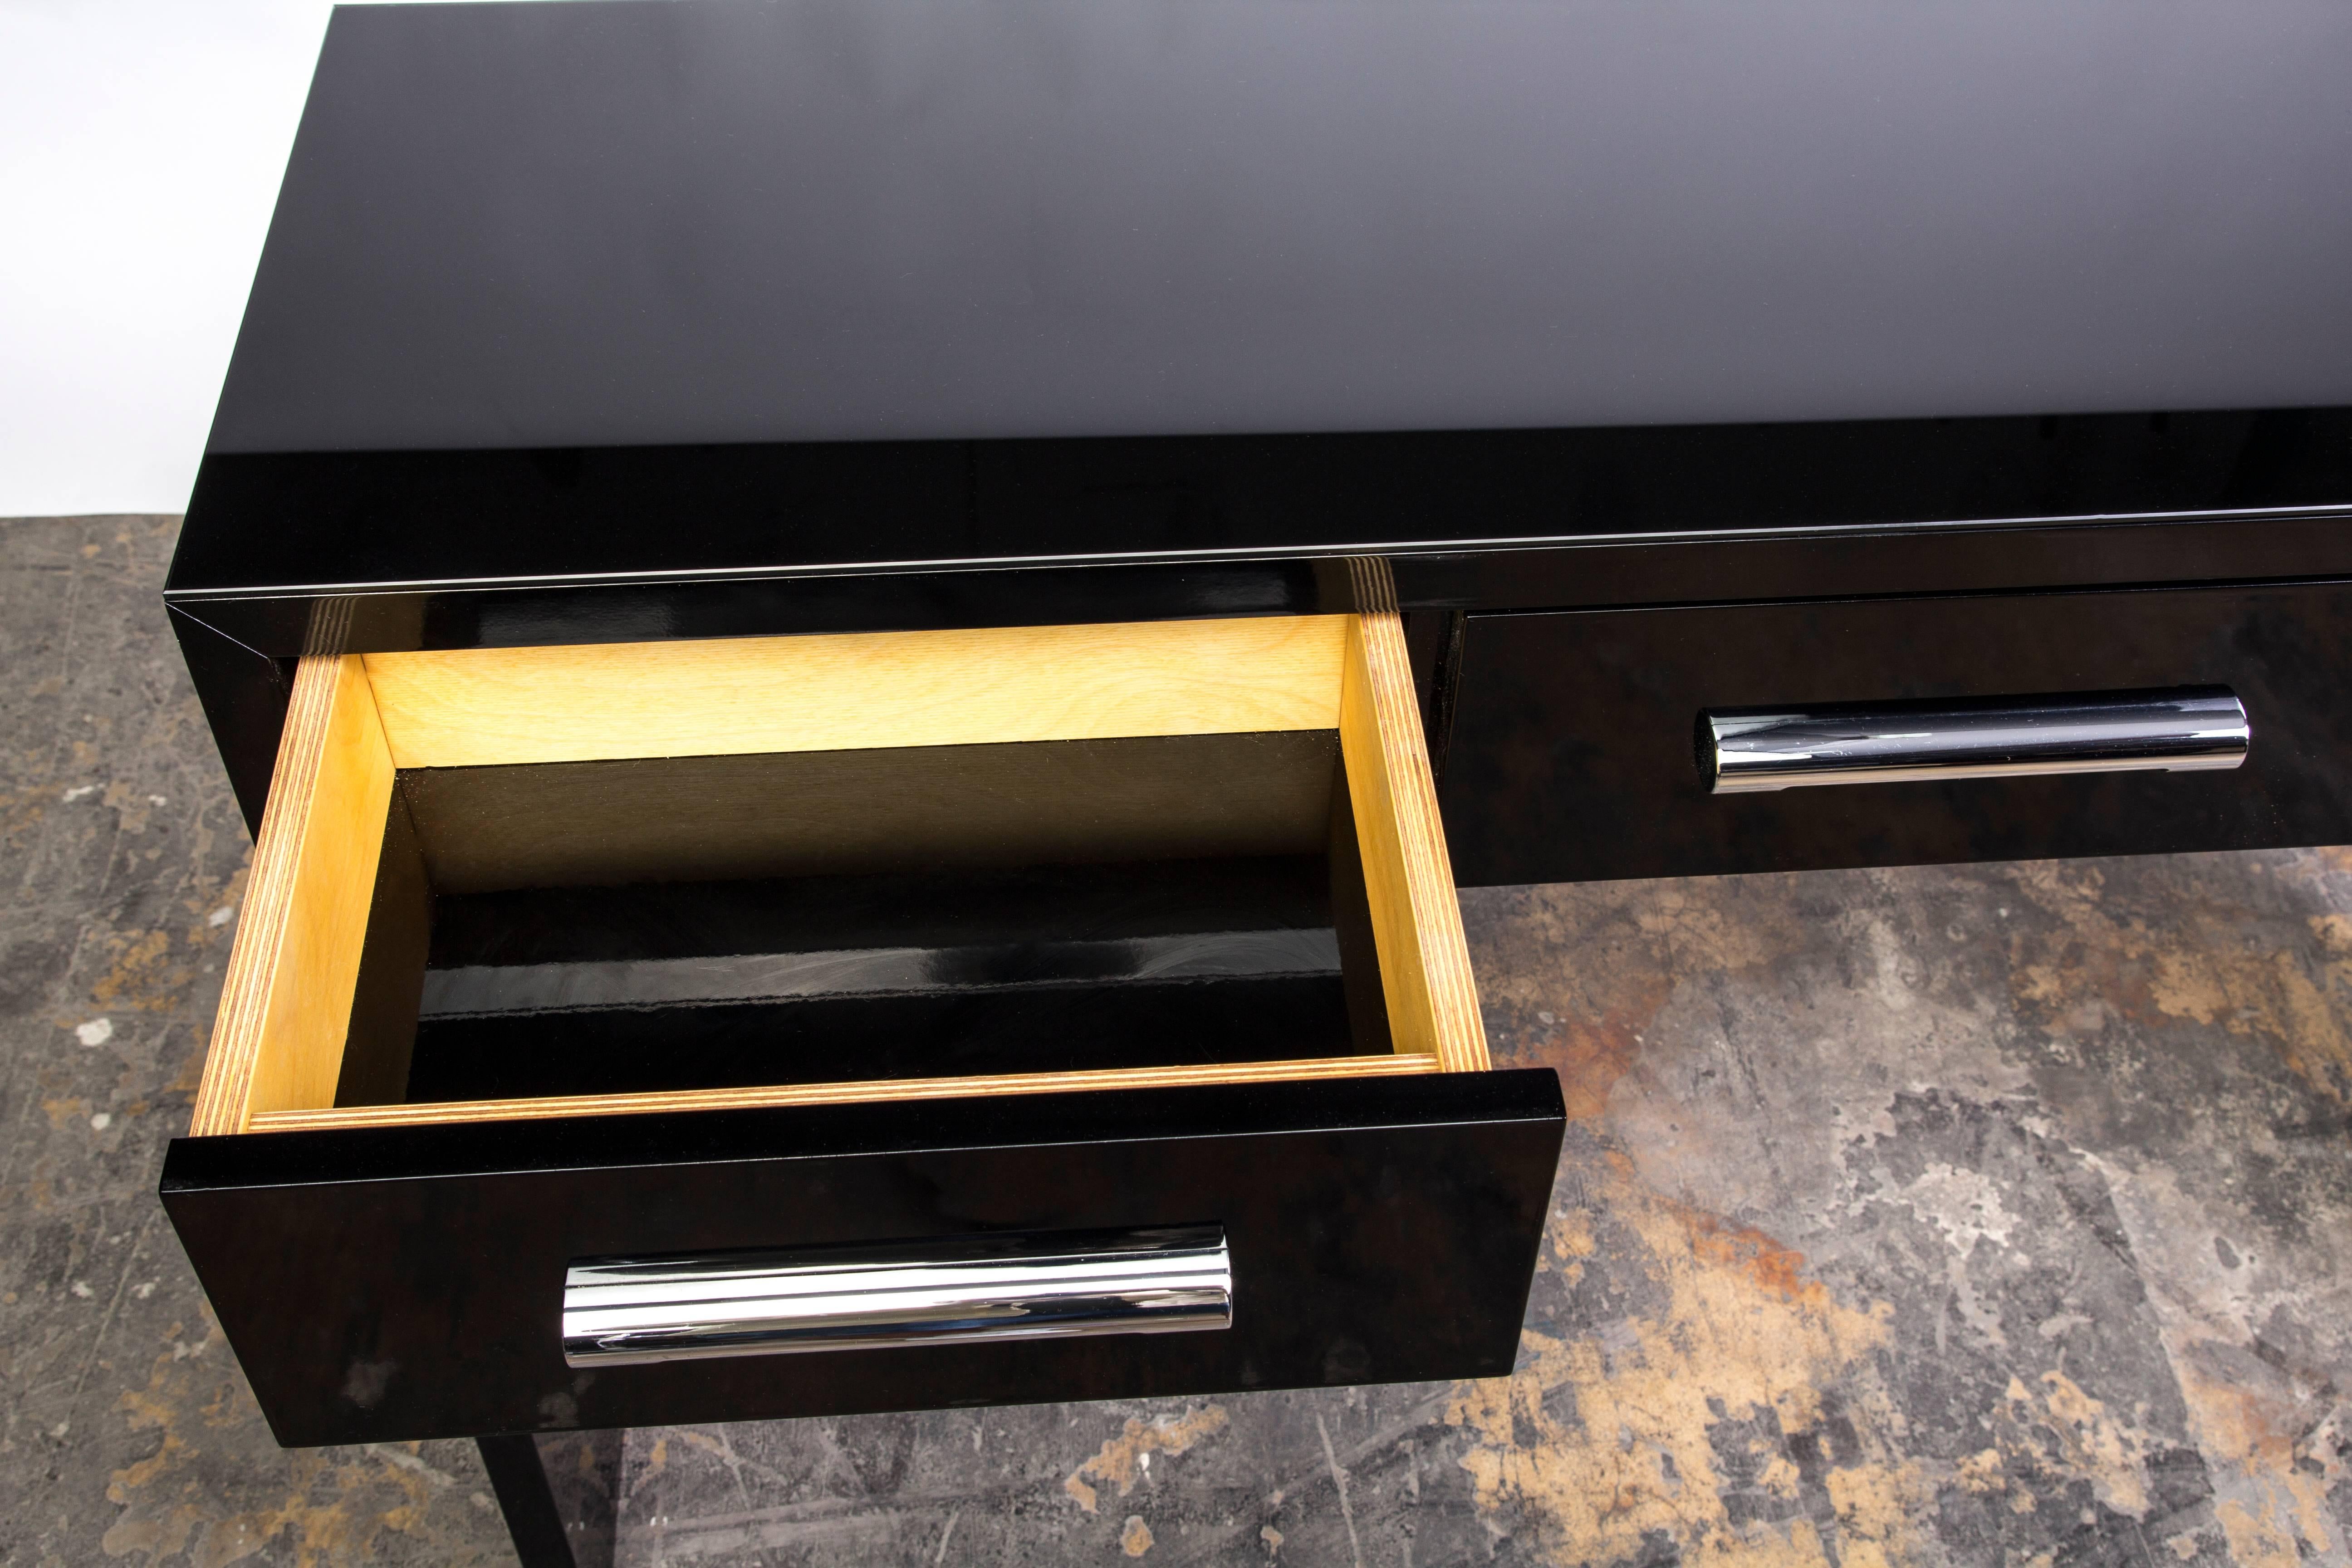 This beautiful Art Deco console was designed in the manner of Bauhaus. It has simplistic design with chrome handles finished and topped with a lacobel plate. Finished in a high gloss black lacquer.